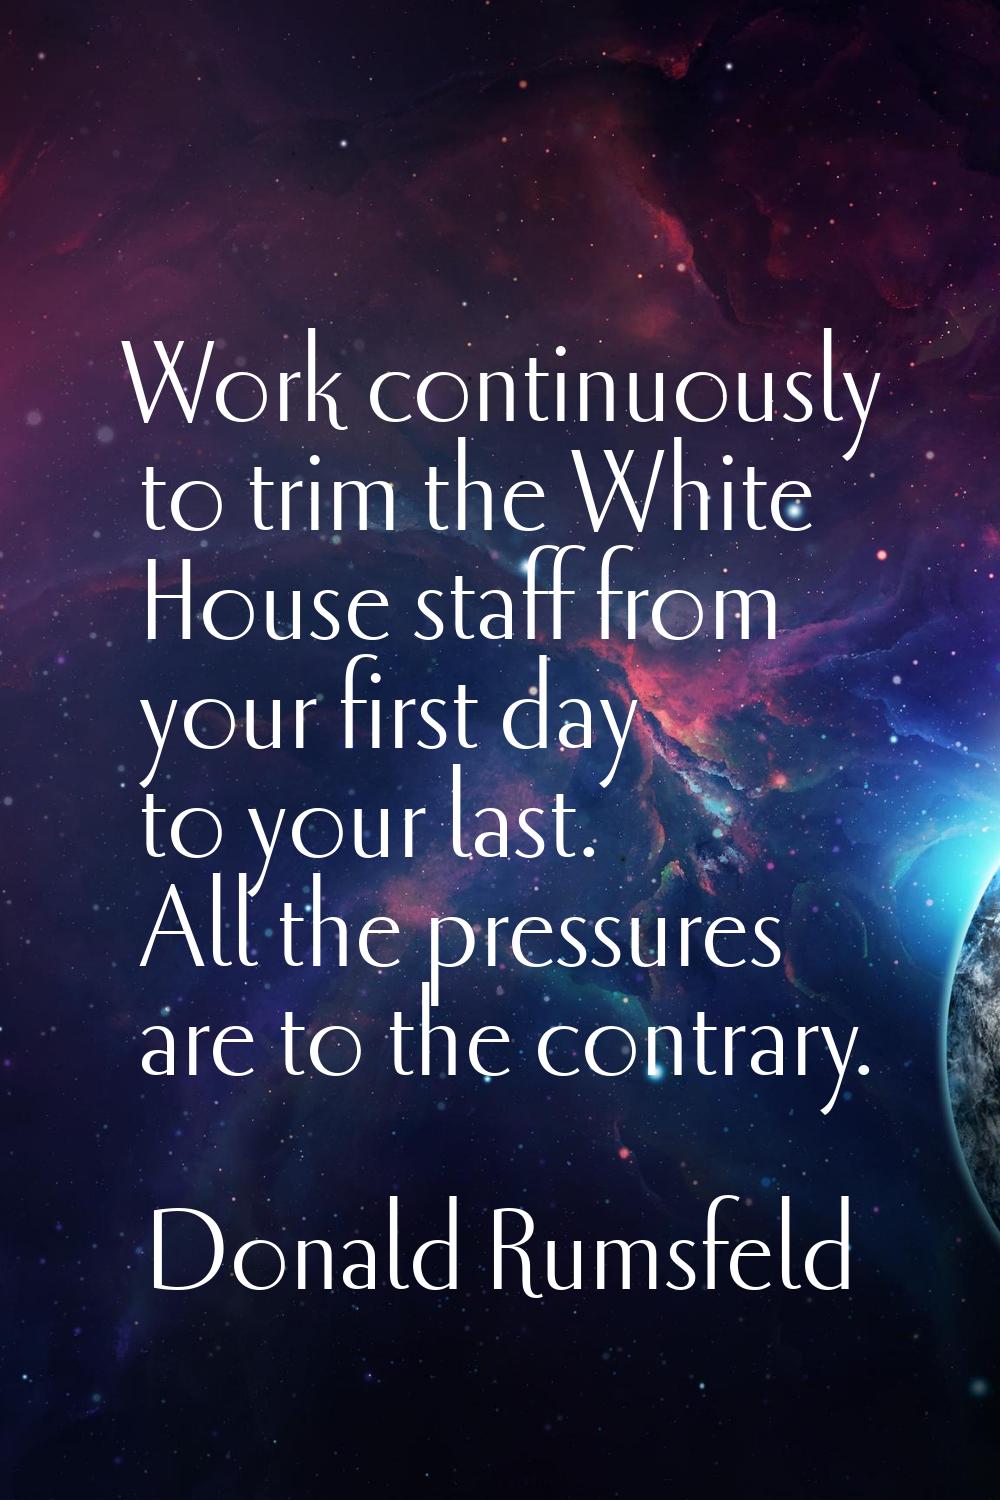 Work continuously to trim the White House staff from your first day to your last. All the pressures